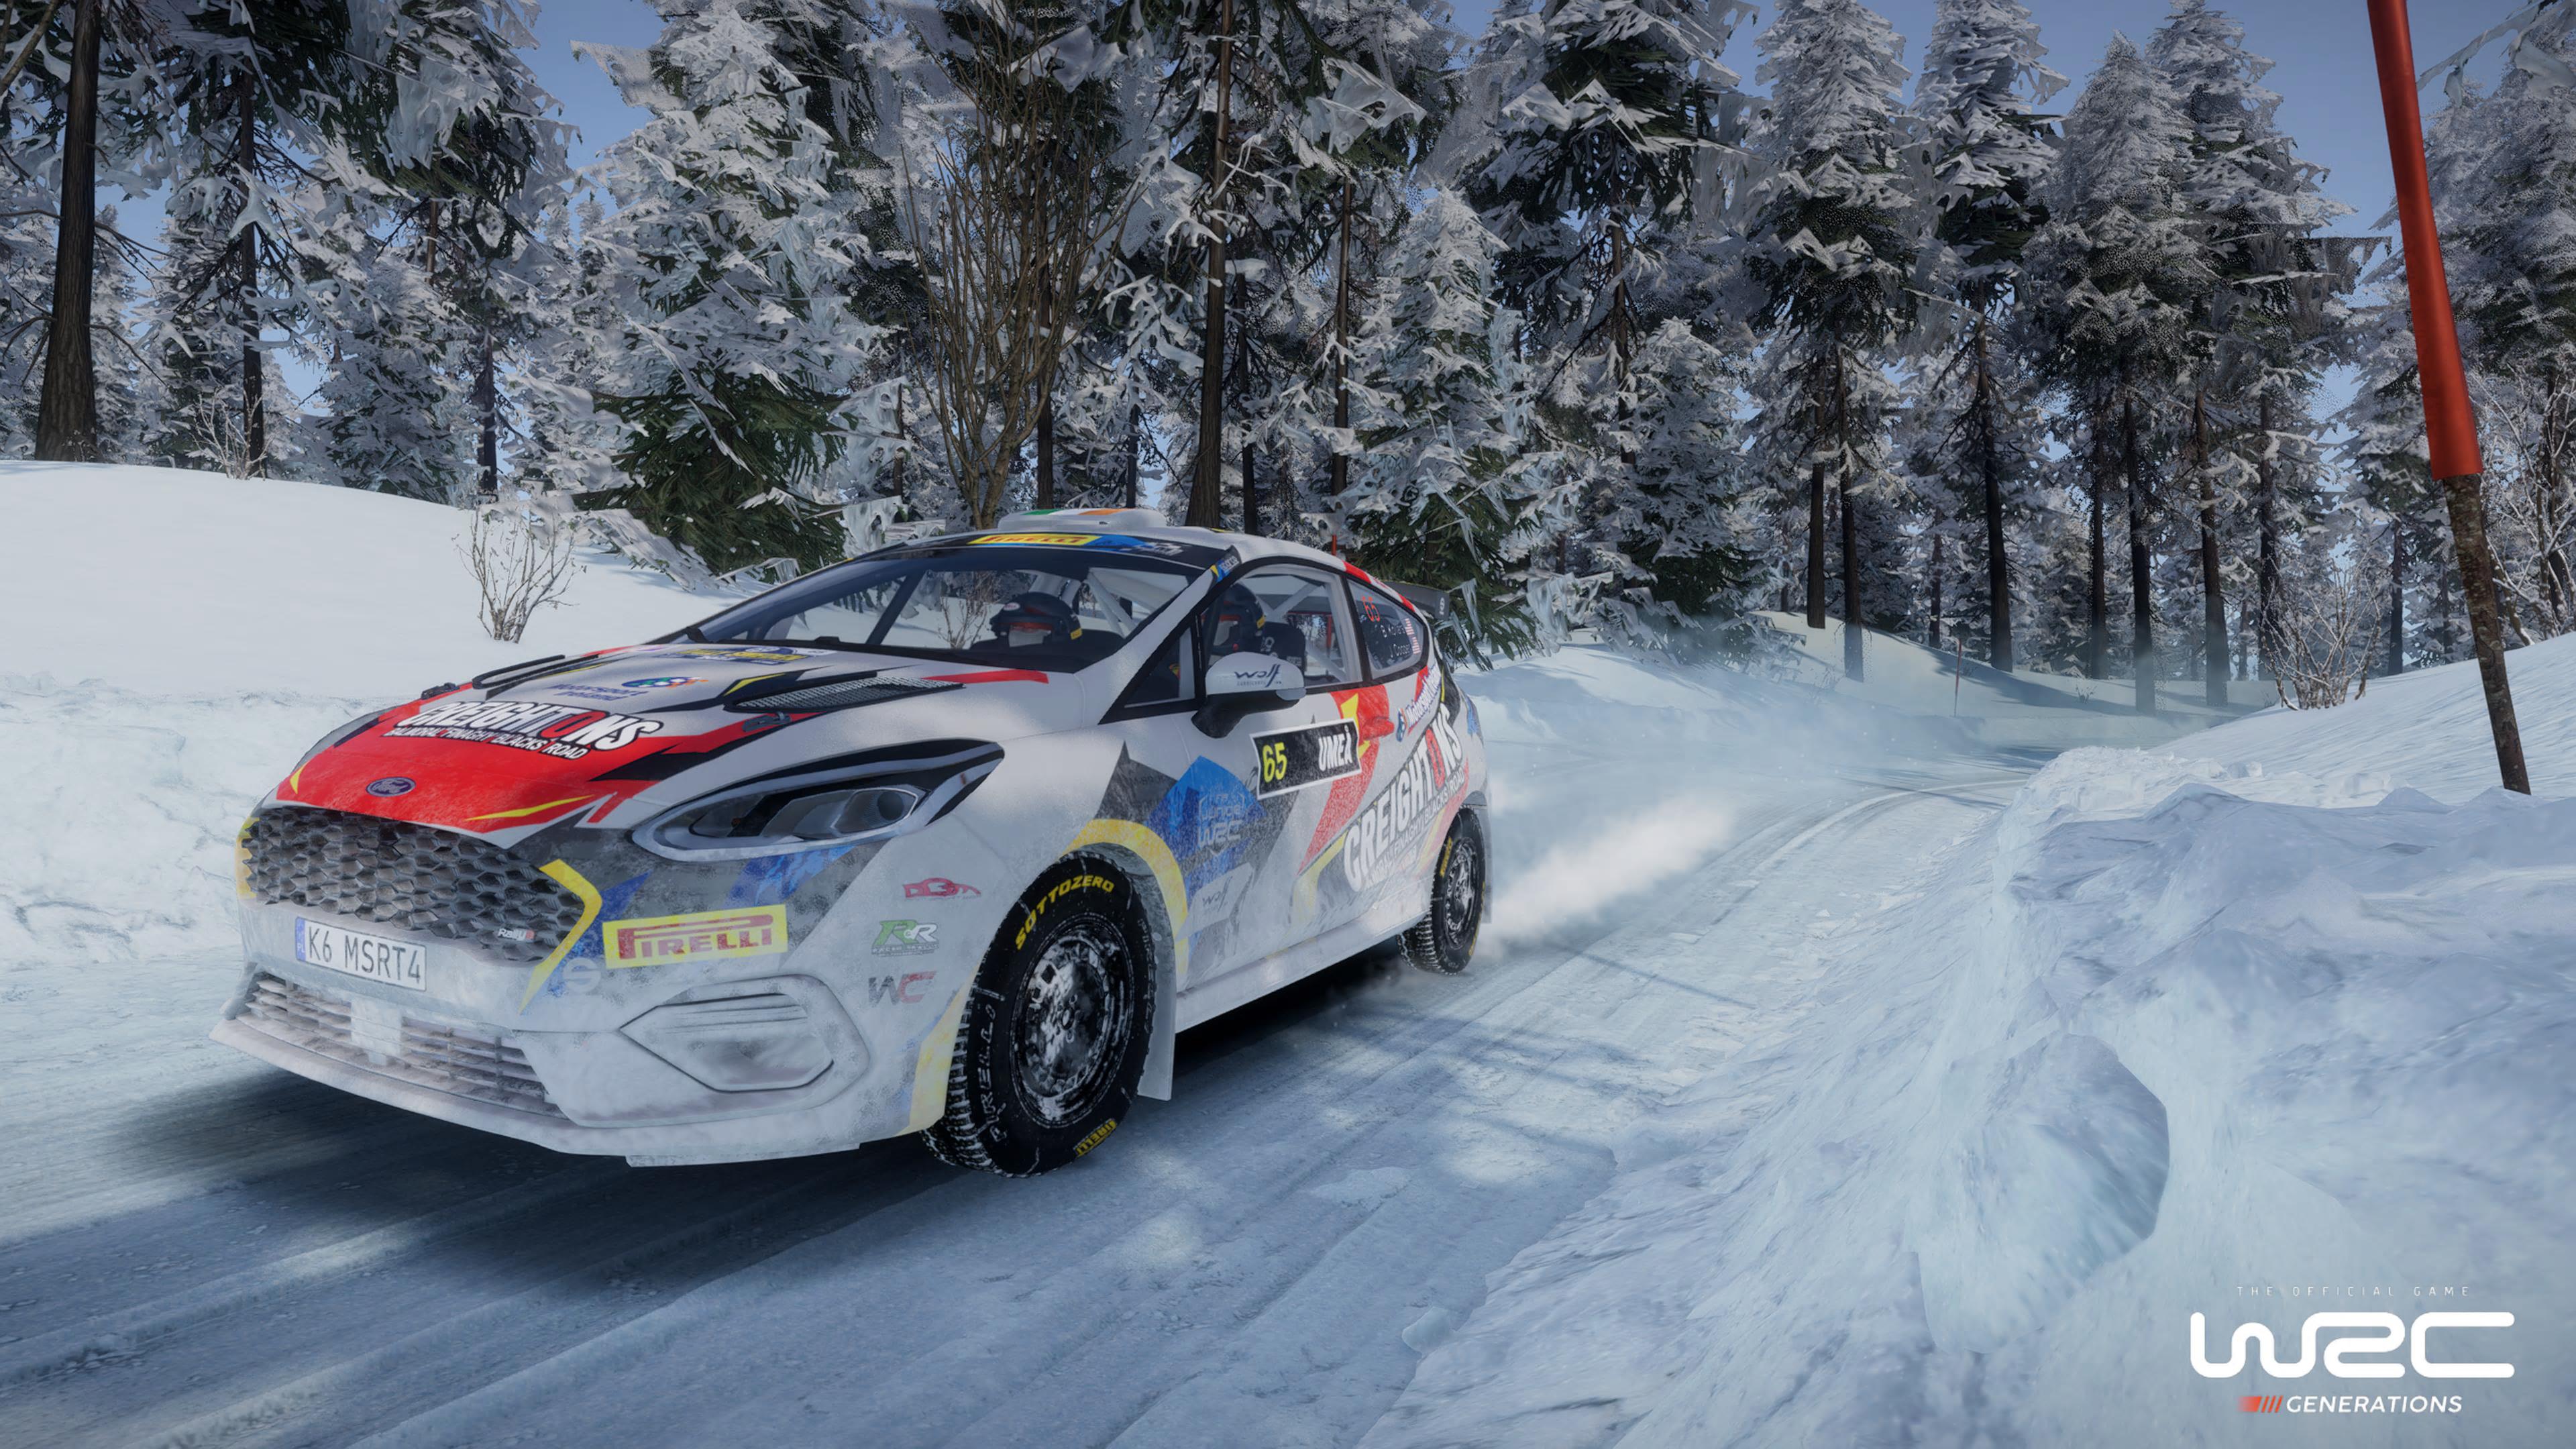 EA's first WRC game will be out this November, it's claimed